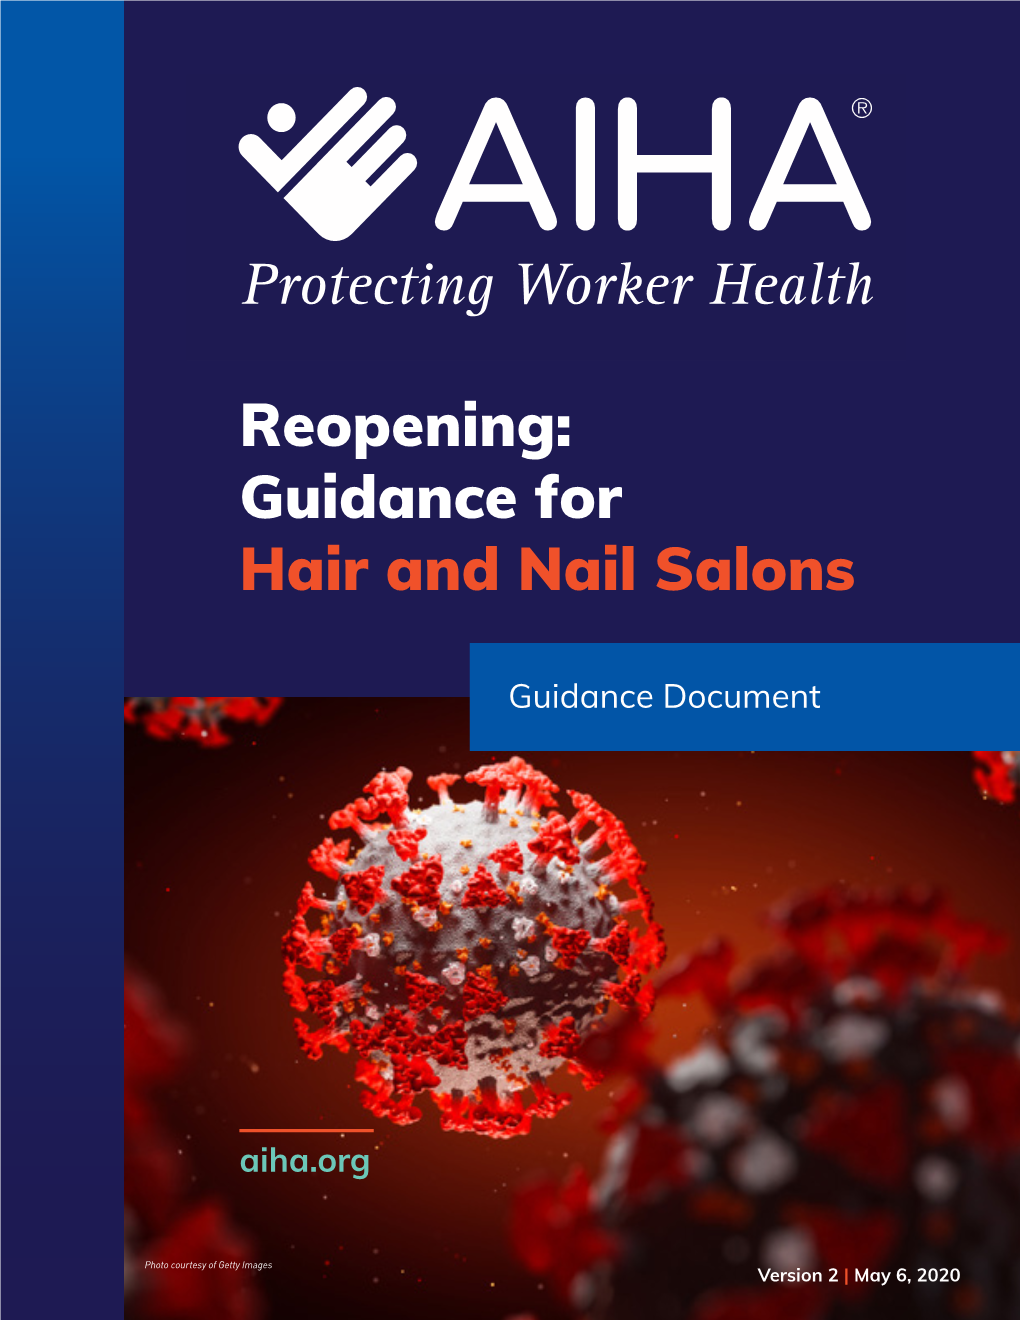 AIHA's Reopening Guidance for Hair and Nail Salons